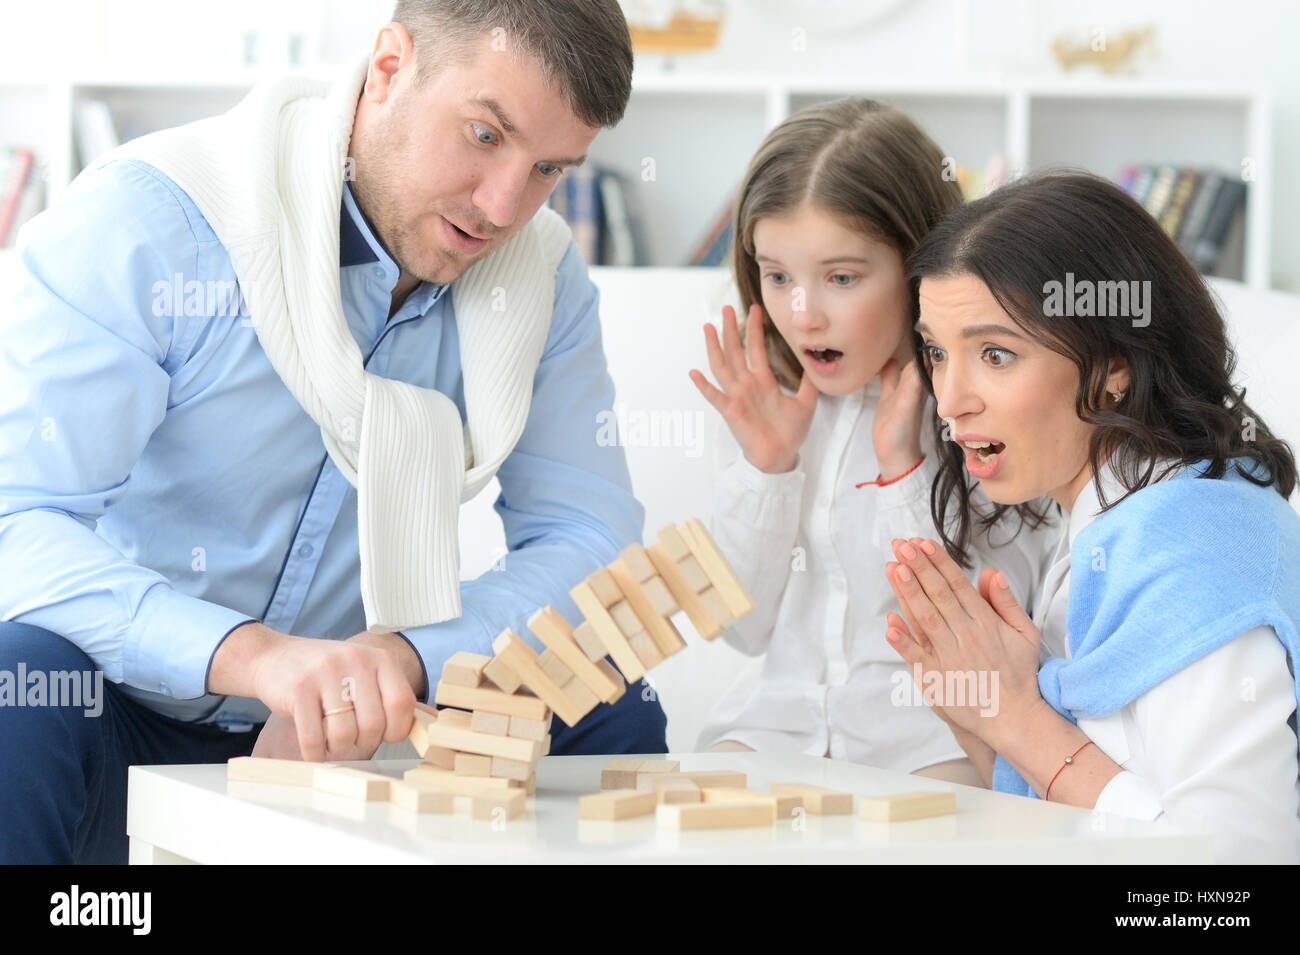 Family with daughter playing a game Stock Photo